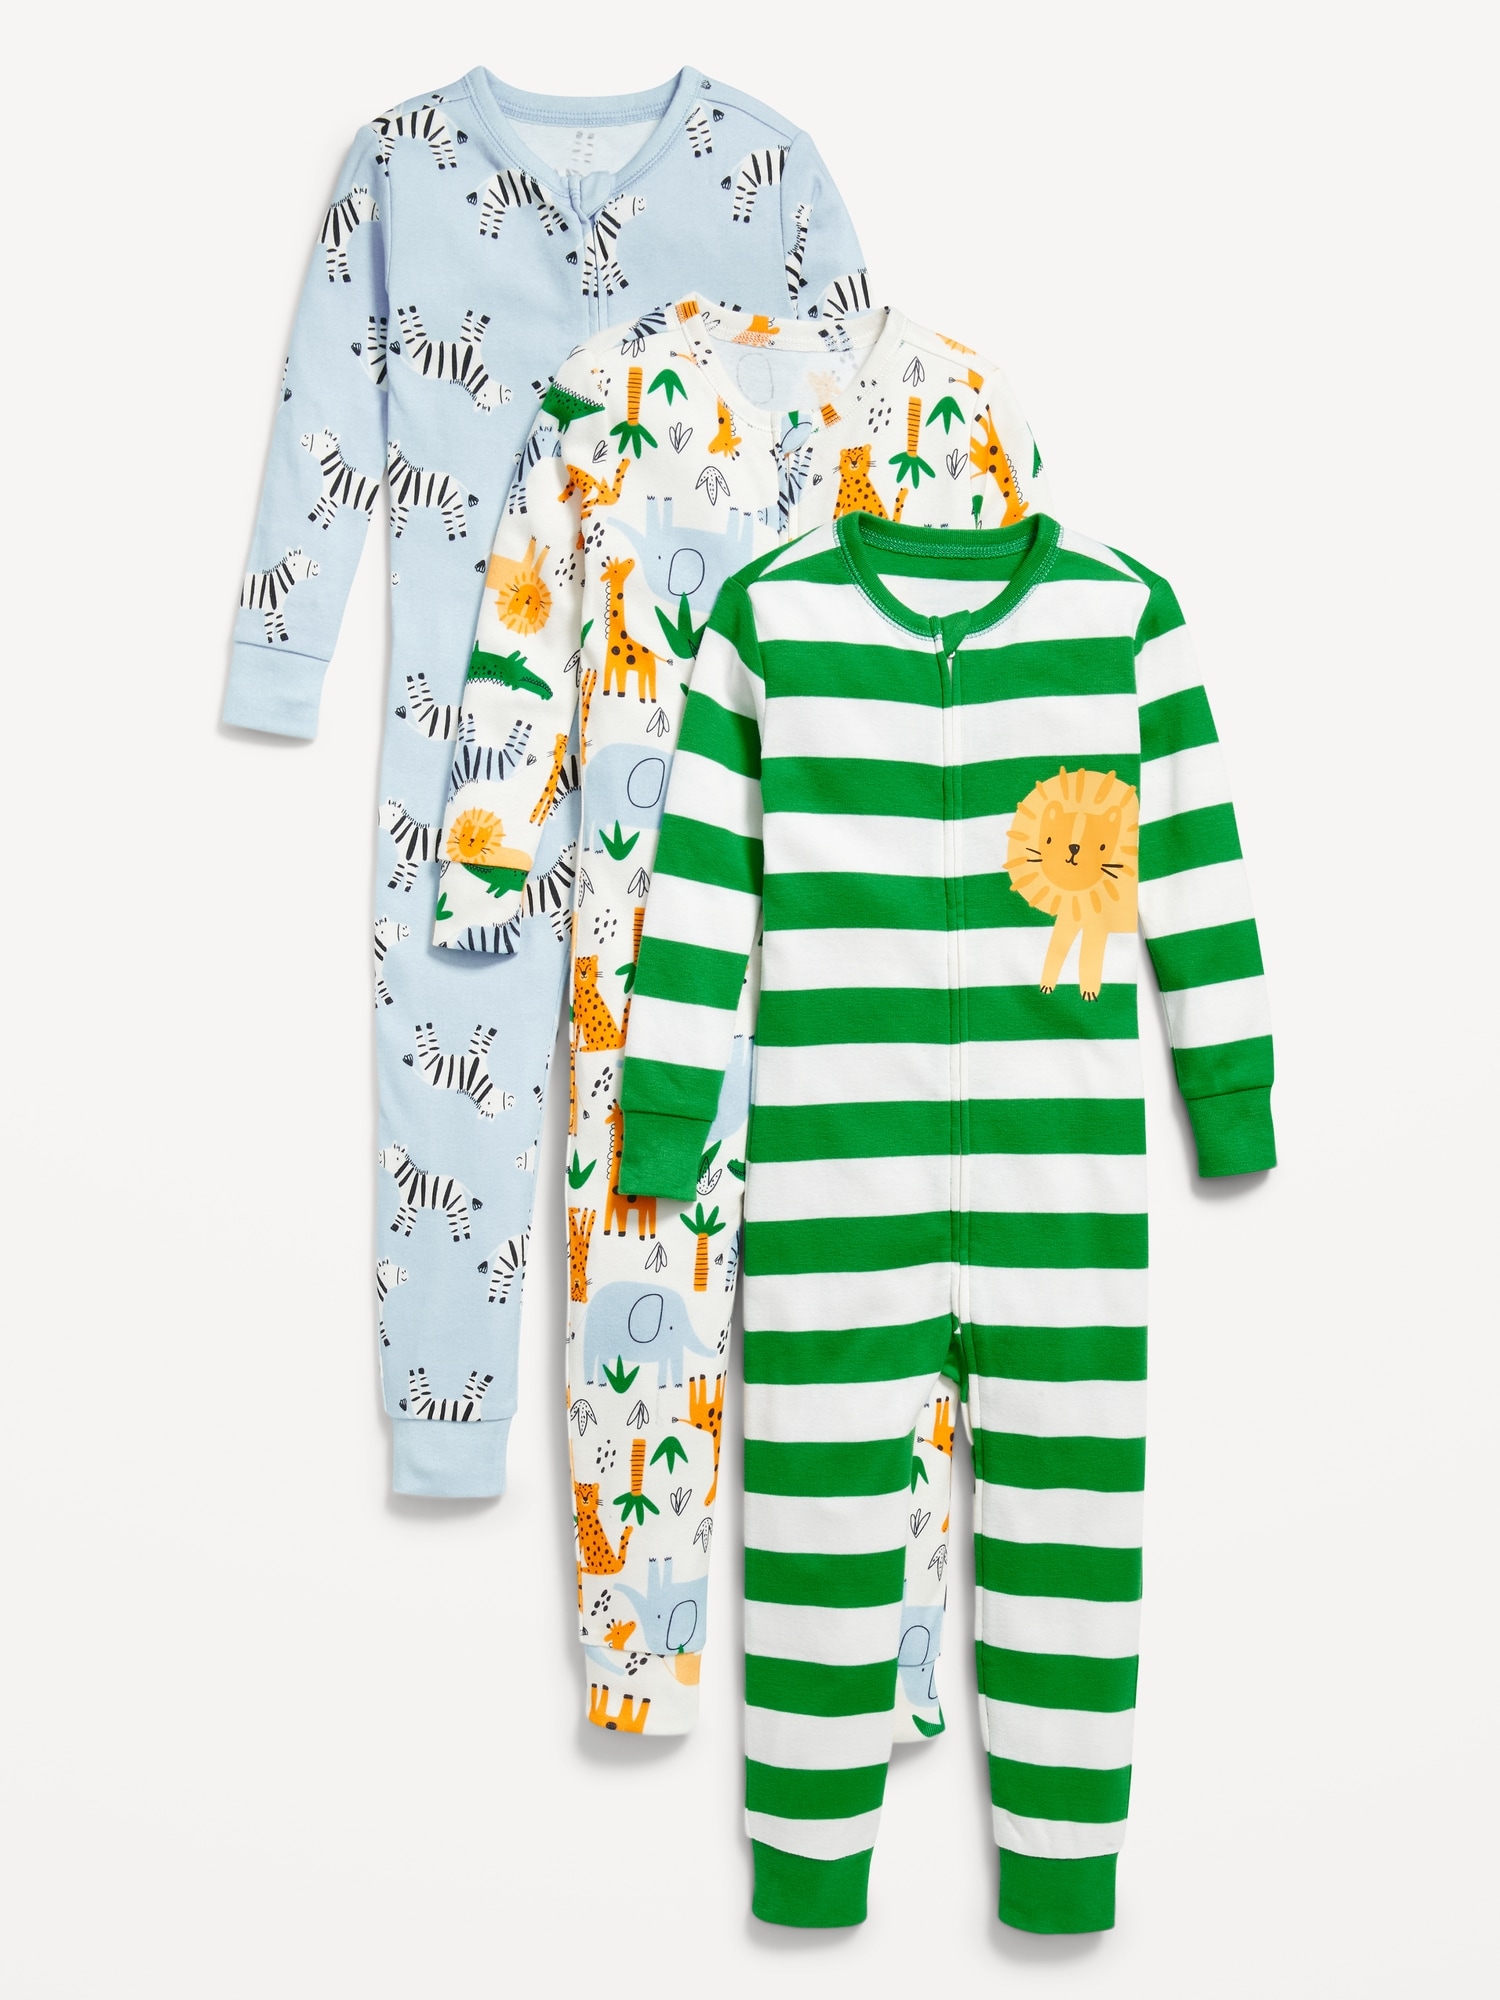 Unisex Snug-Fit Printed Pajama One-Piece 3-Pack for Toddler & Baby Hot Deal